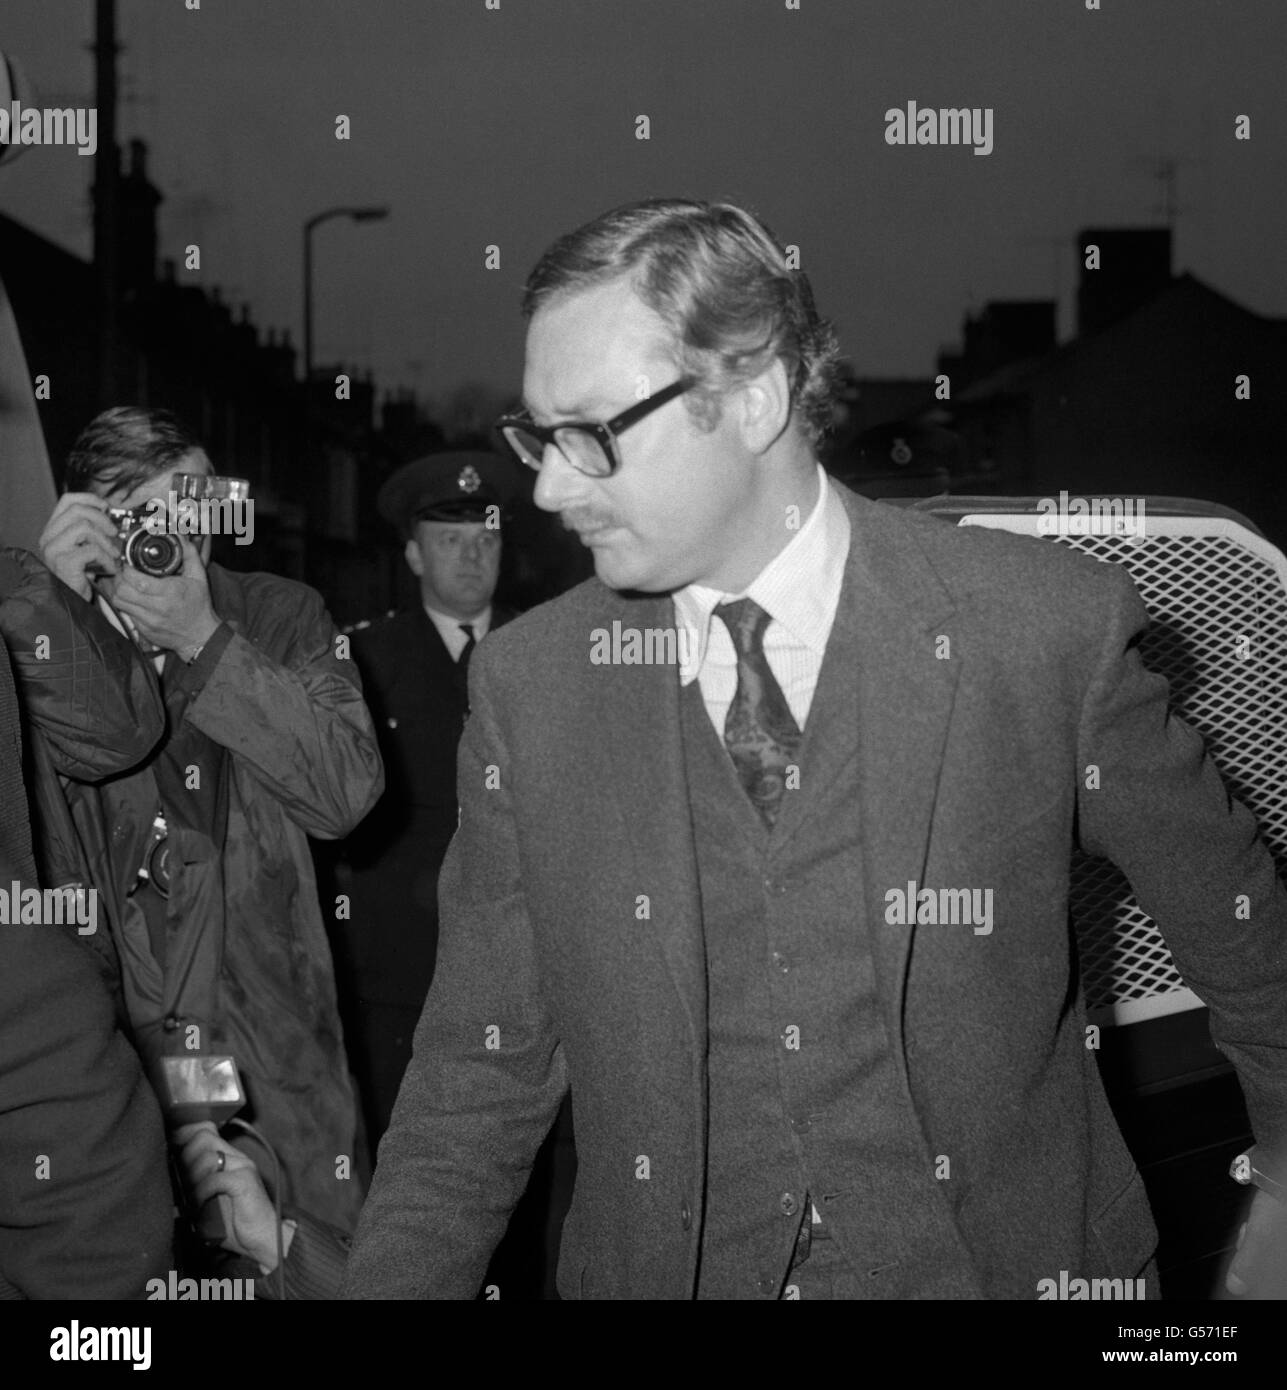 Bruce Reynolds at Linslade, Bedfordshire, who was remanded for a third time, accused of being concerned in the Great Train Robbery in 1963. He was remanded in custody until 4/12/68 after a two minute hearing Stock Photo